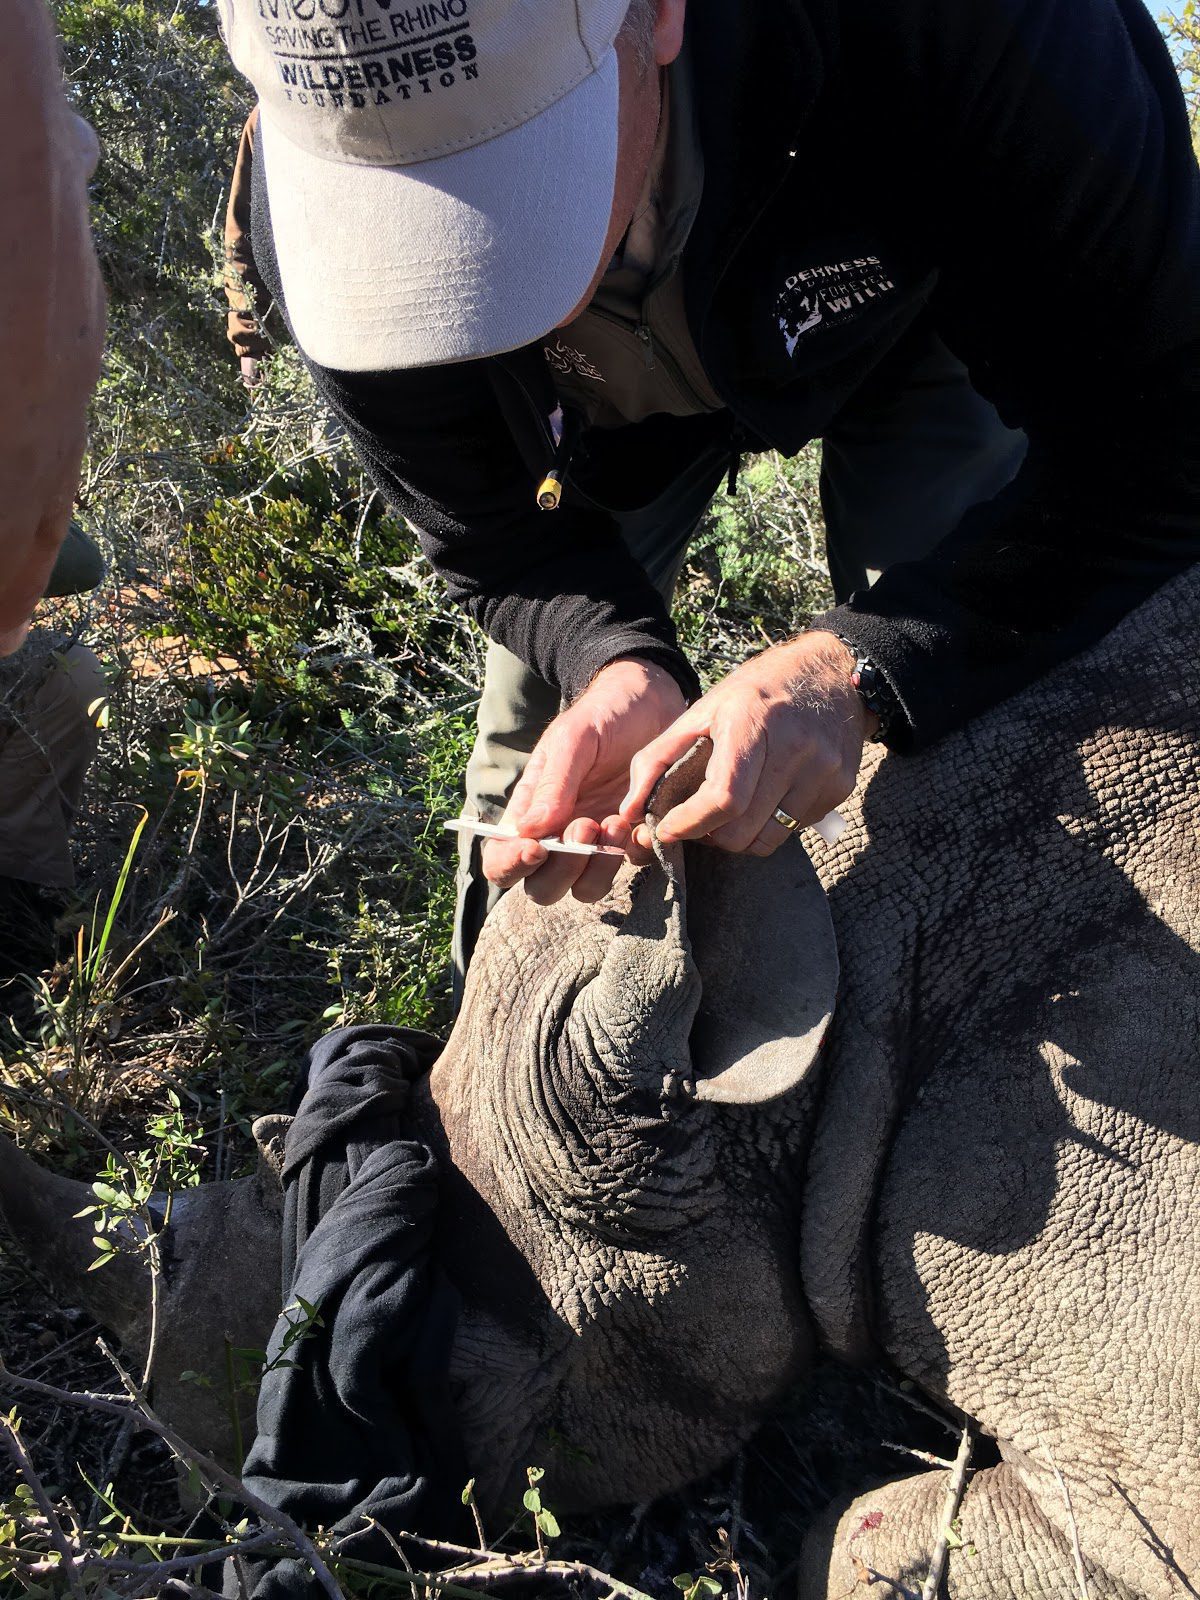 Do You Love Conservation? You Need to Monitor a Rhino on Safari, Wildlife Vet